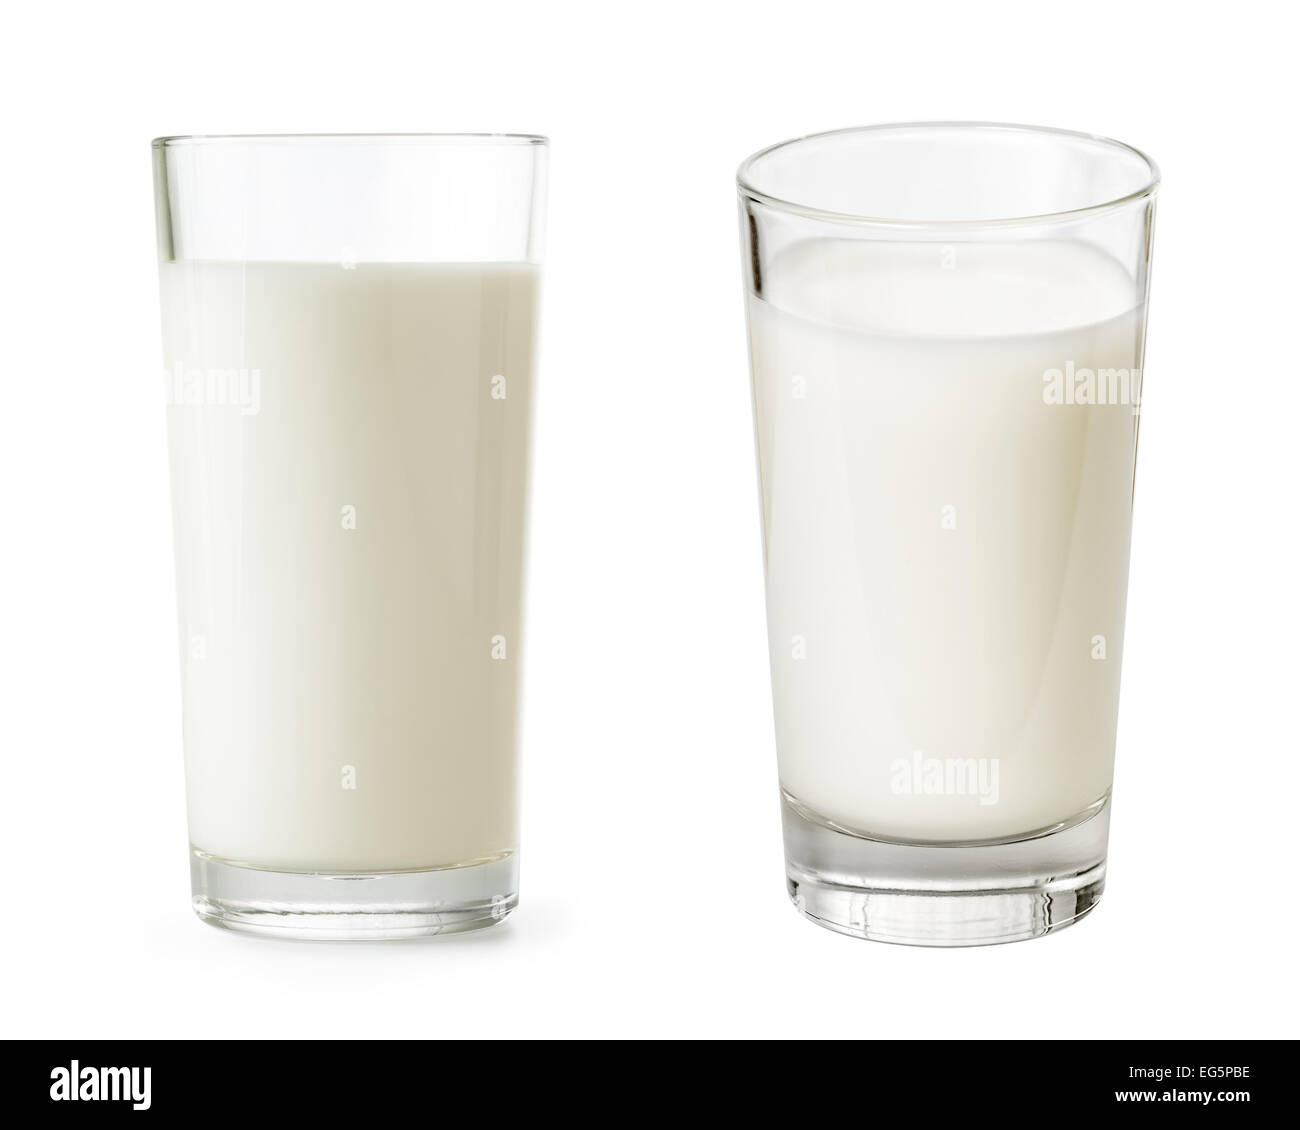 https://c8.alamy.com/comp/EG5PBE/glass-of-milk-set-isolated-with-clipping-path-included-EG5PBE.jpg